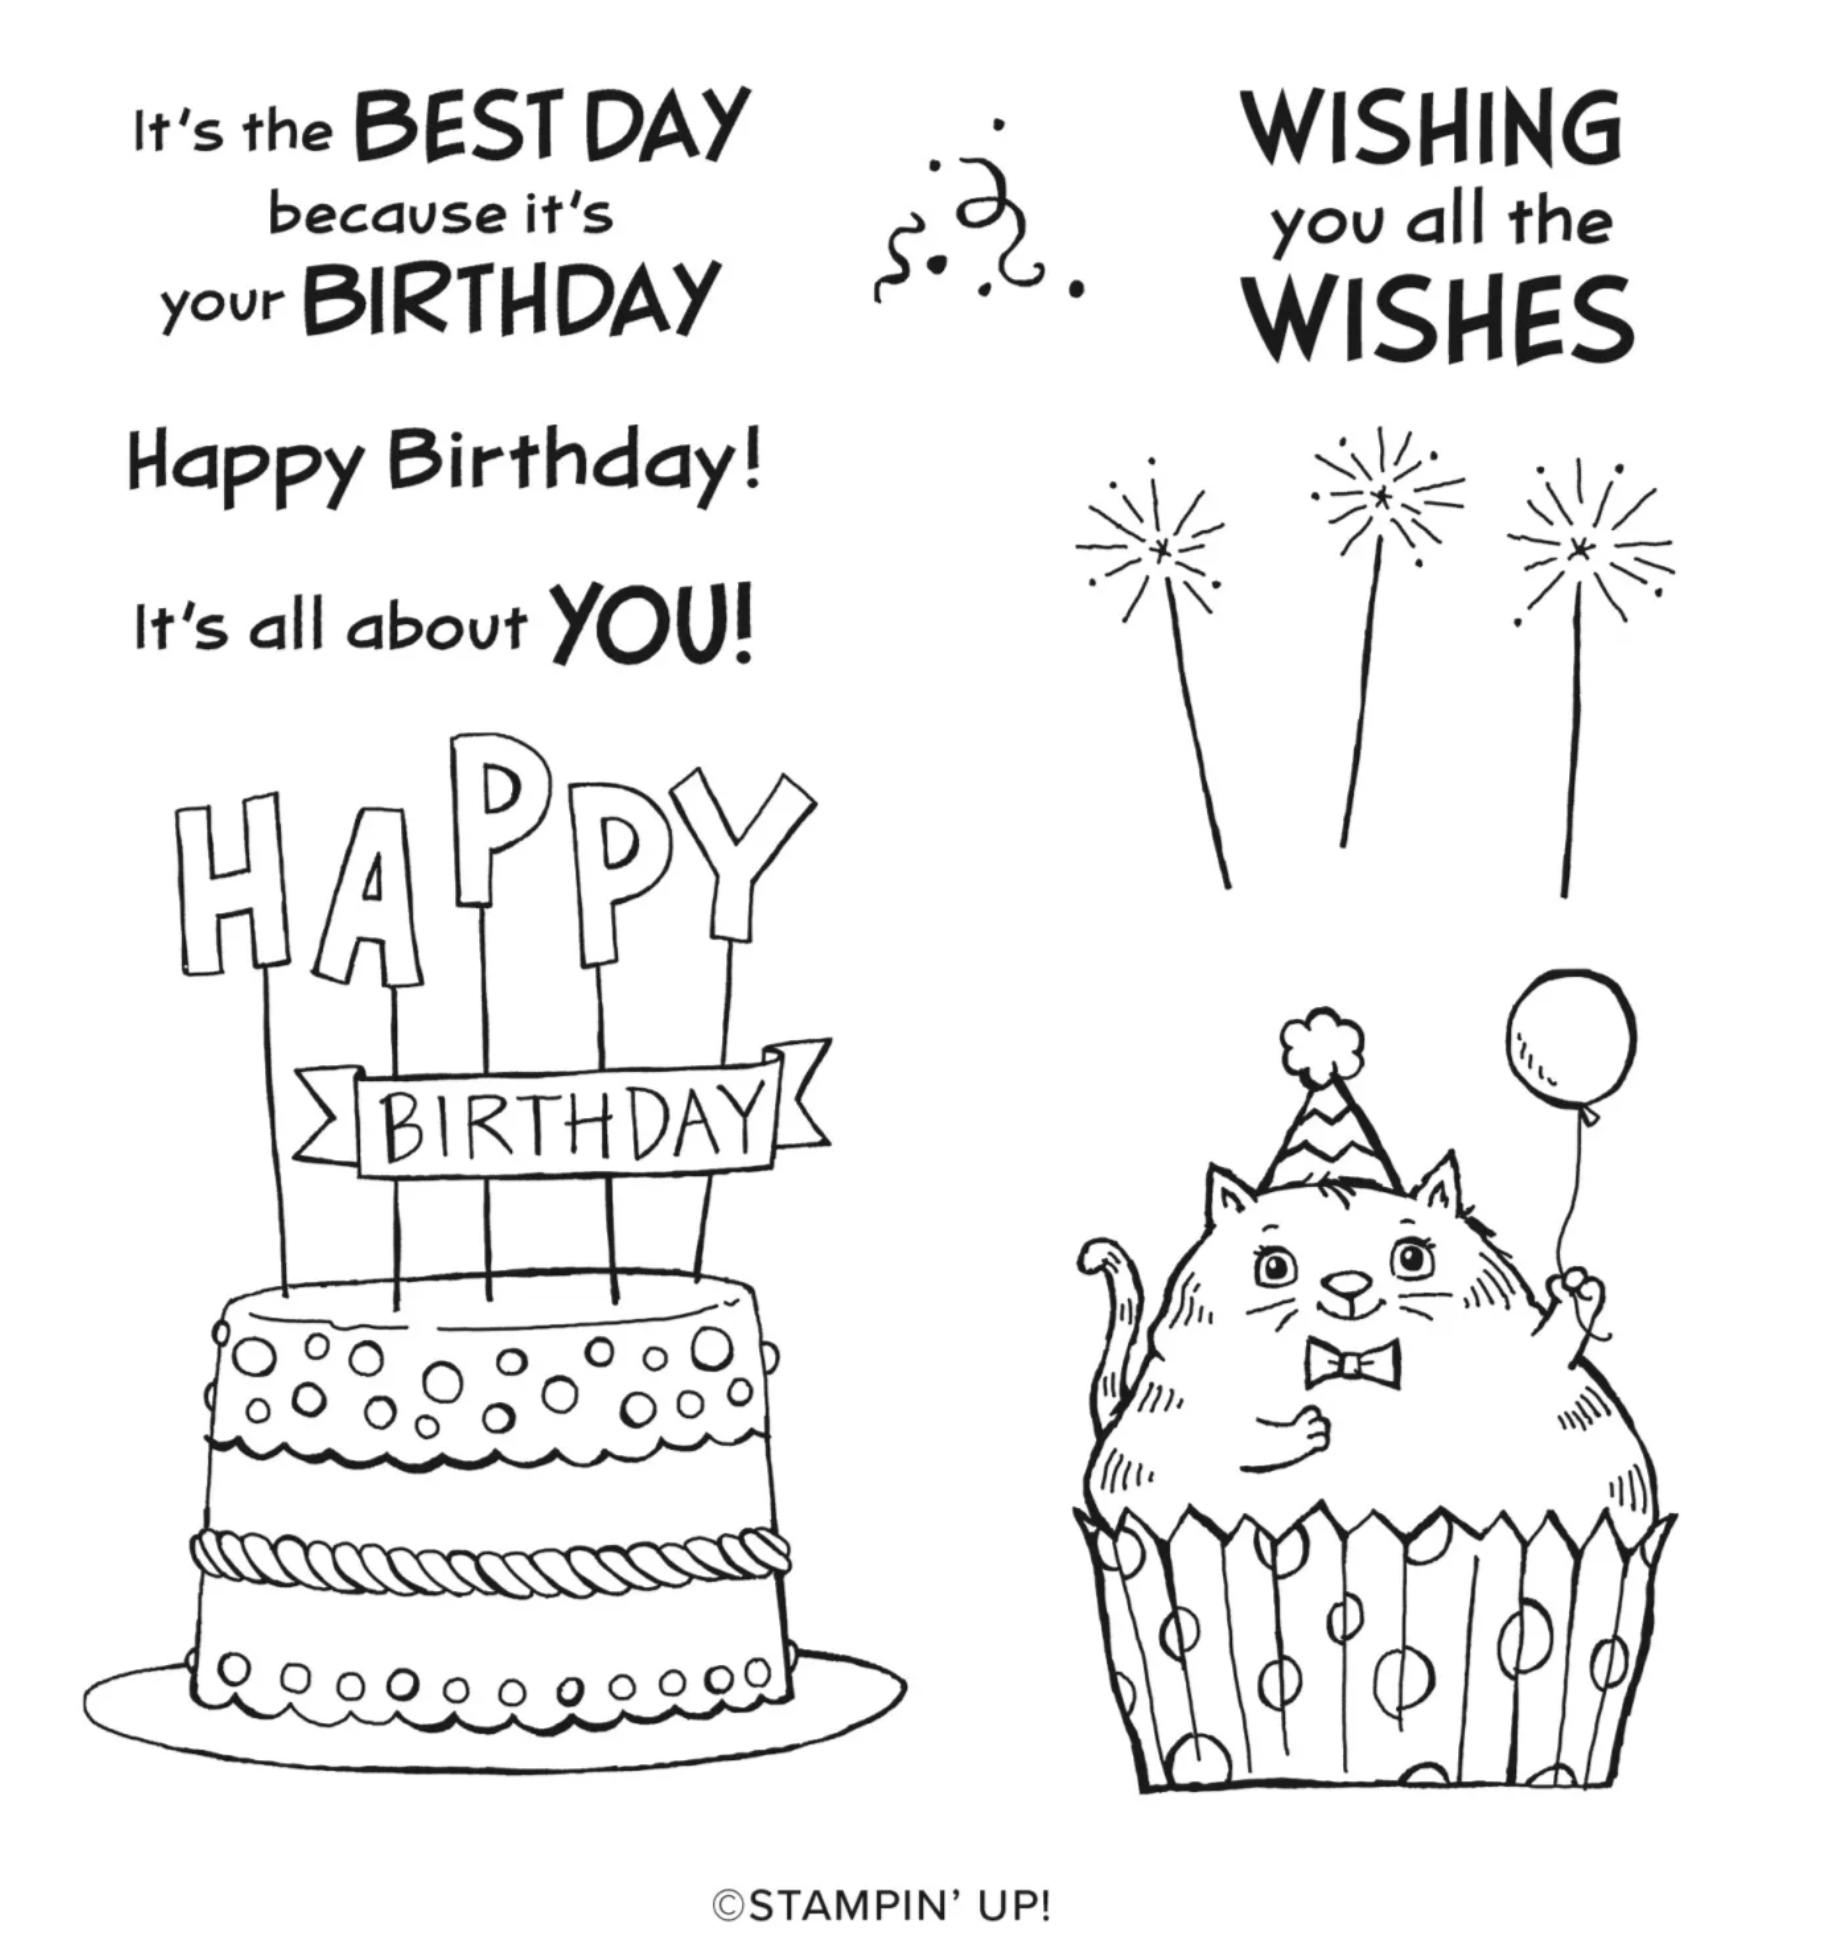 Stampin-Up-Best-Day-Stamp-Set-is-perfect-for-making-homemade-birthday-cards